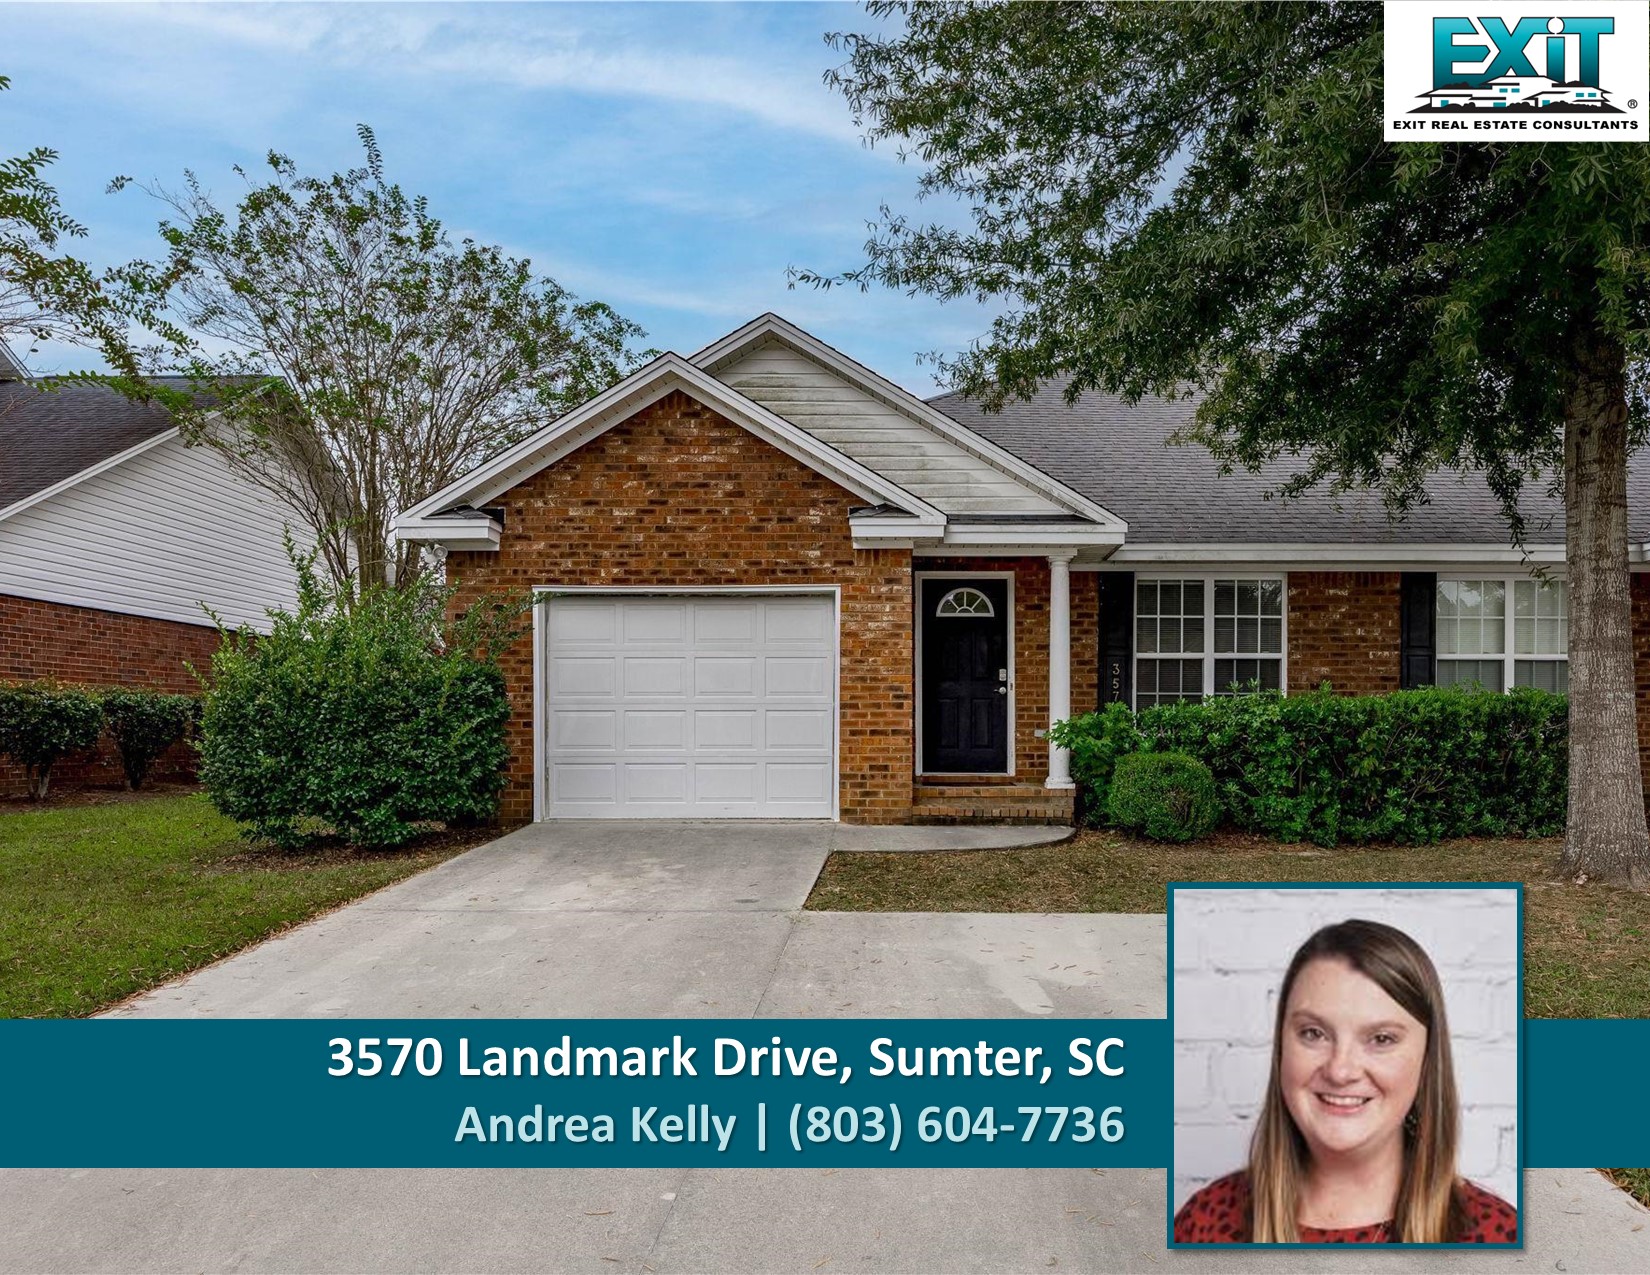 Just listed in Sumter